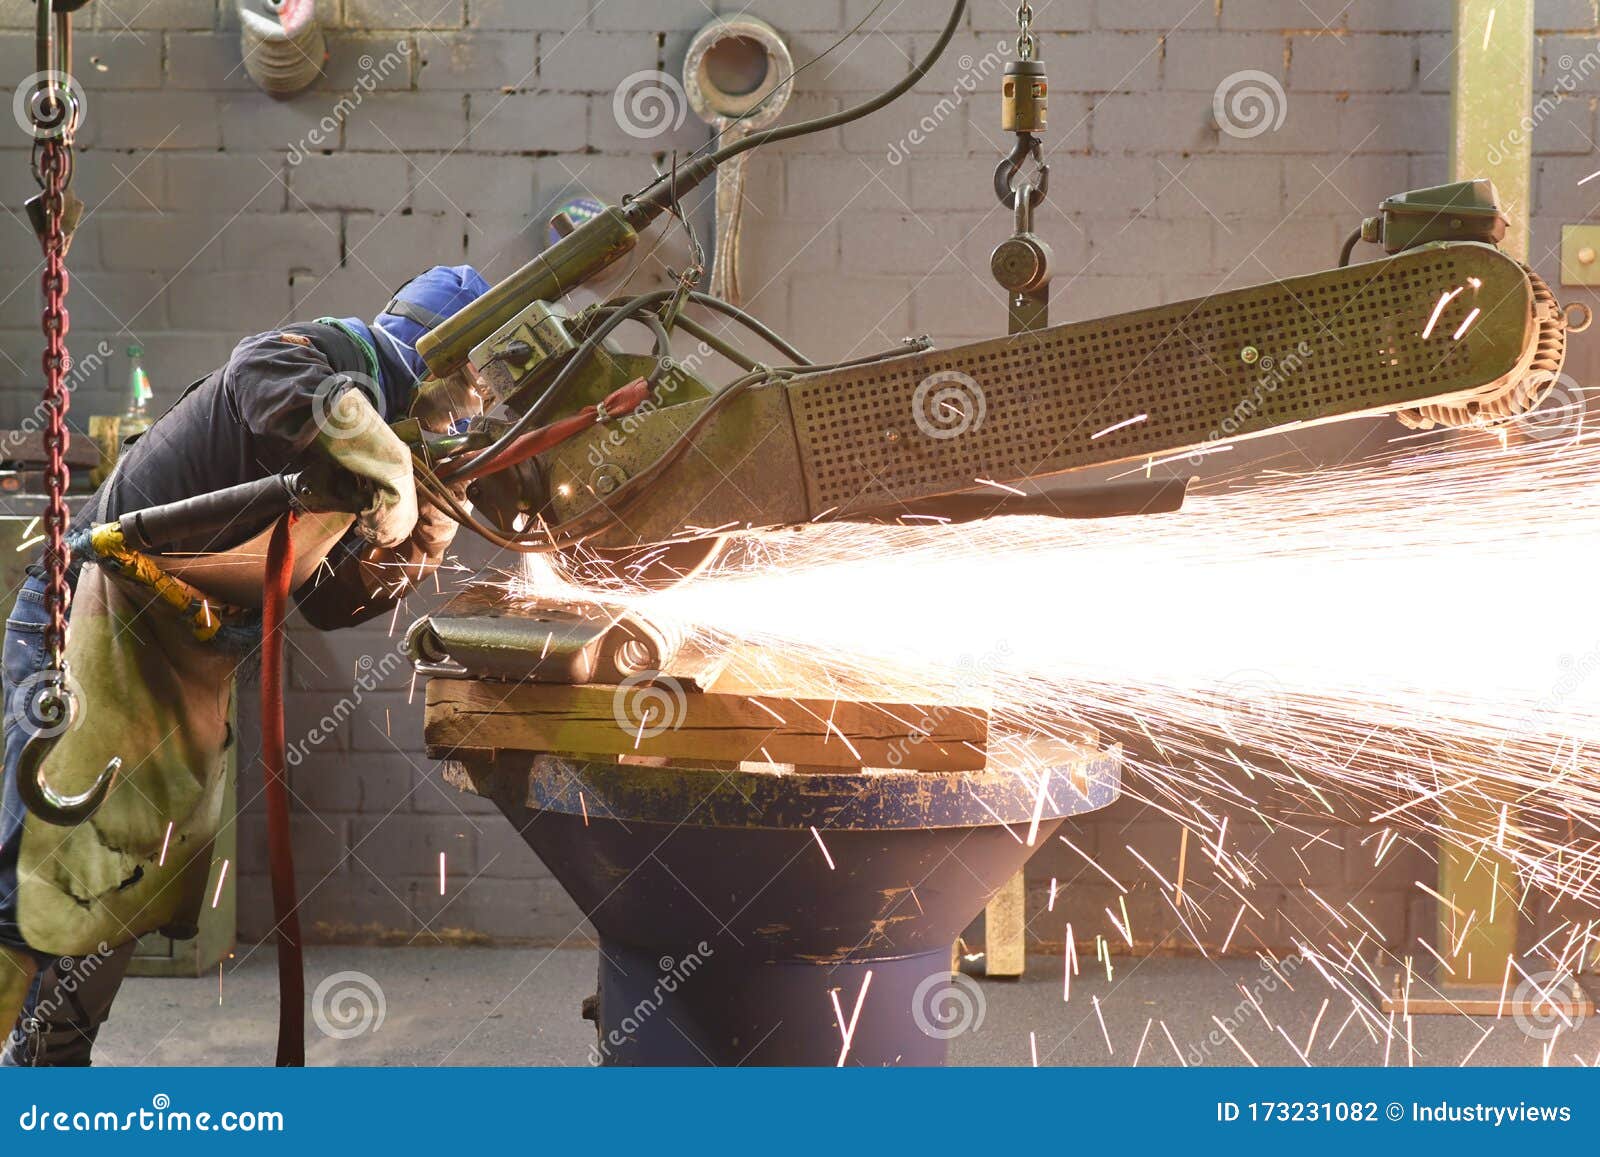 workers in protective equipment in a foundry work on a casting with a grinding machine at the workplace